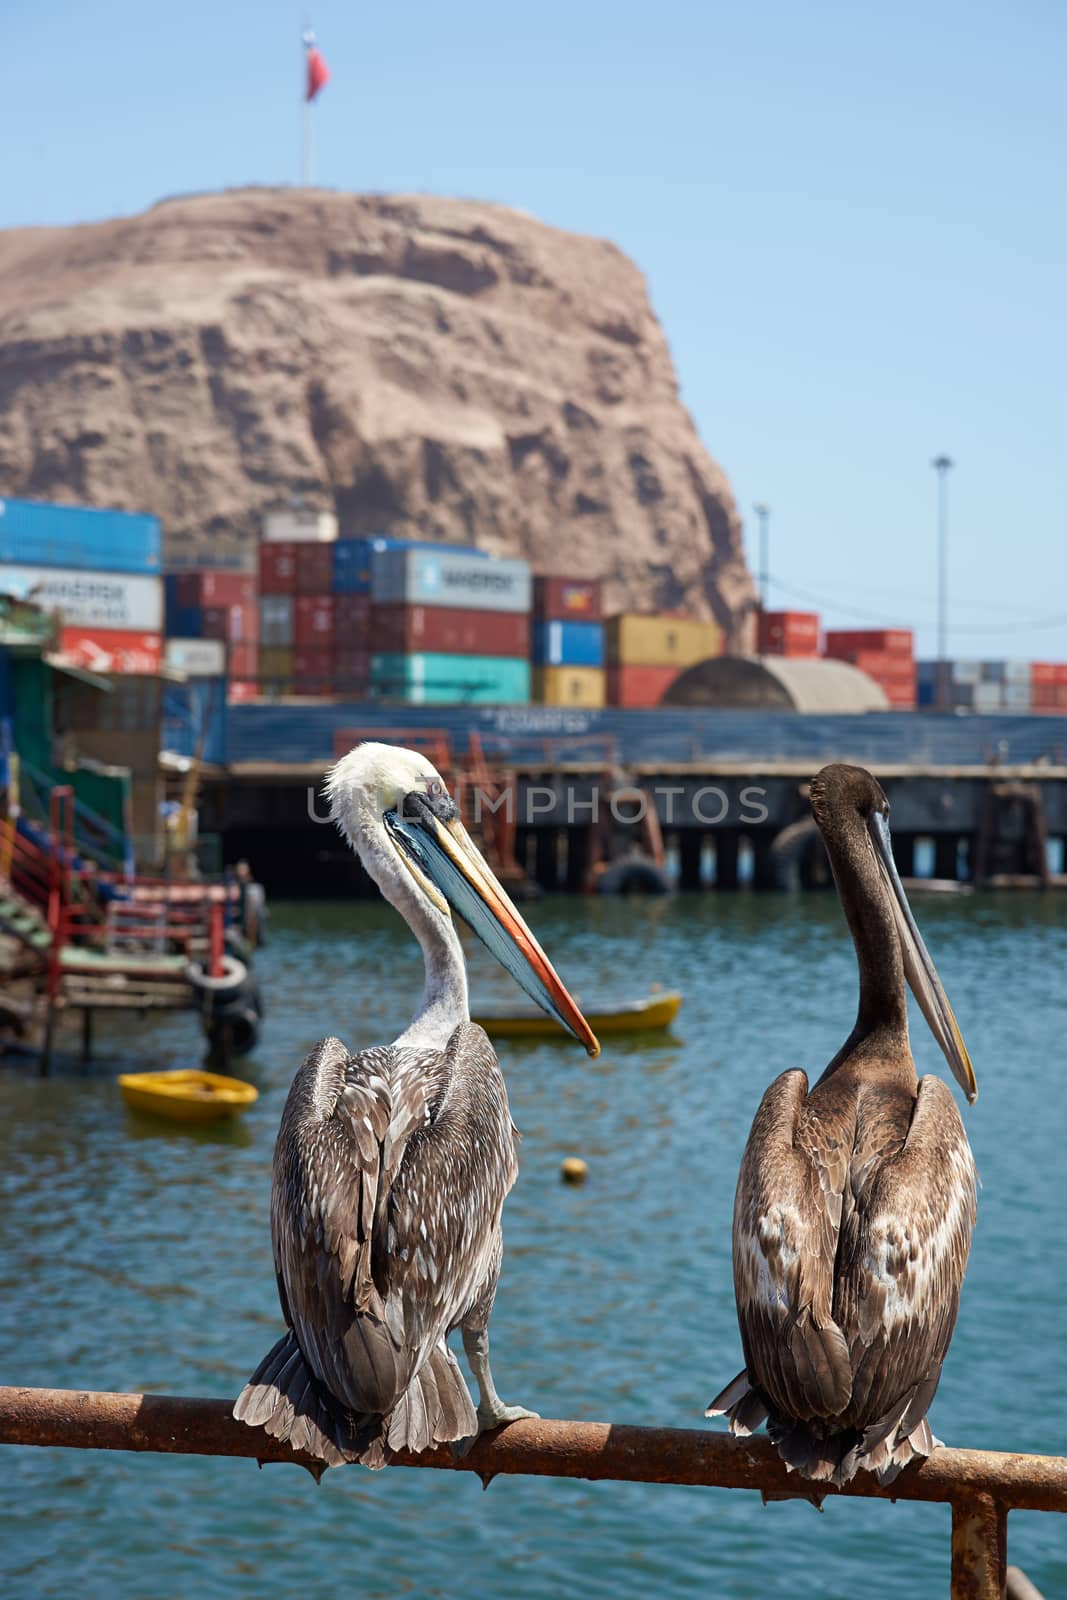 Peruvian Pelicans (Pelecanus thagus) standing on a railing in the fishing harbour of Arica in Northern Chile.